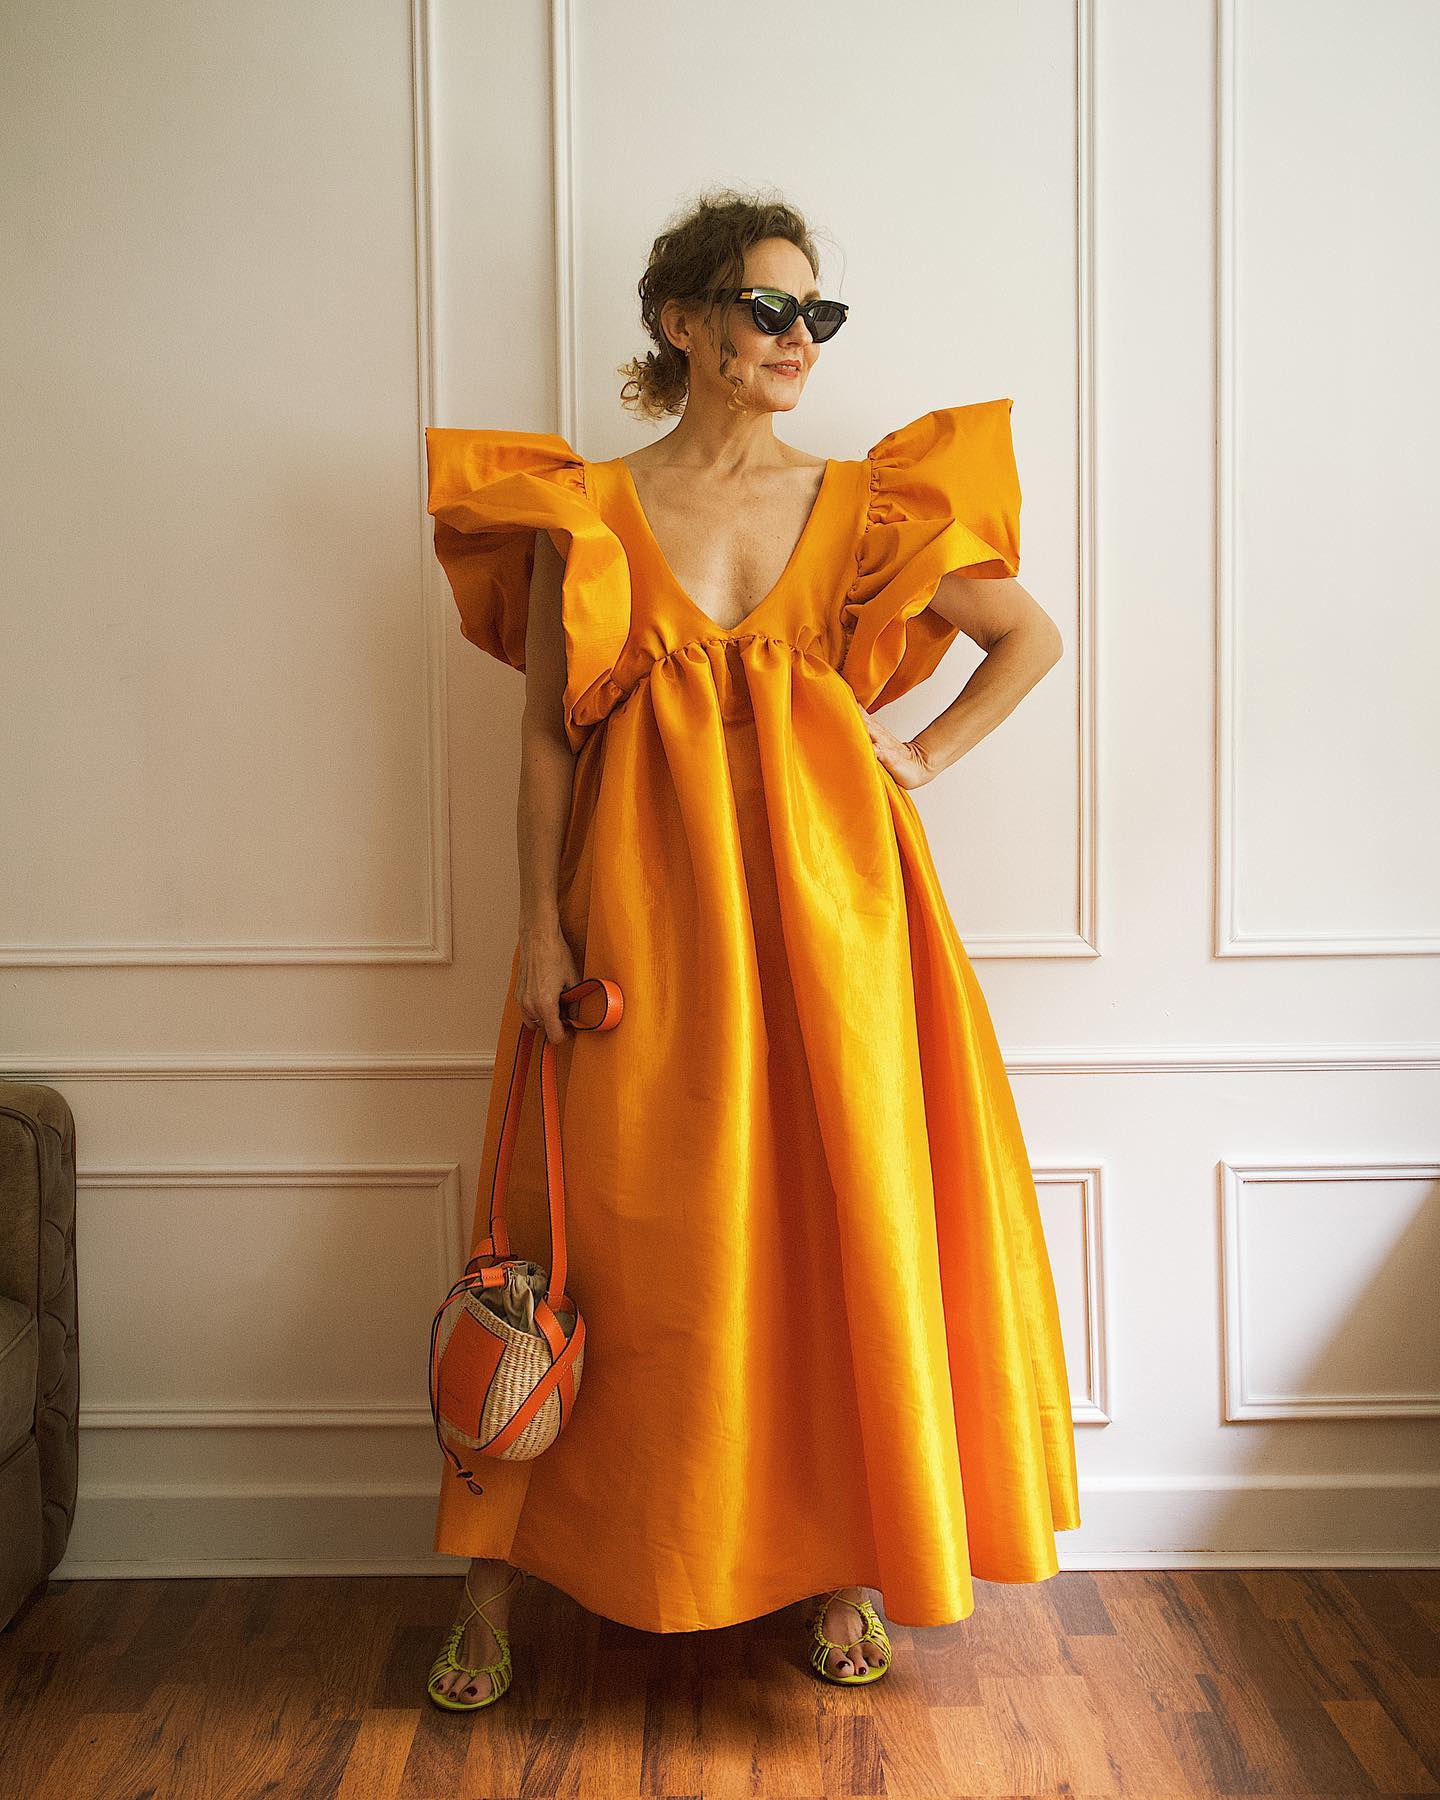 6 Stylish Wedding Guest Outfits for Women Over 50 | Who What Wear UK